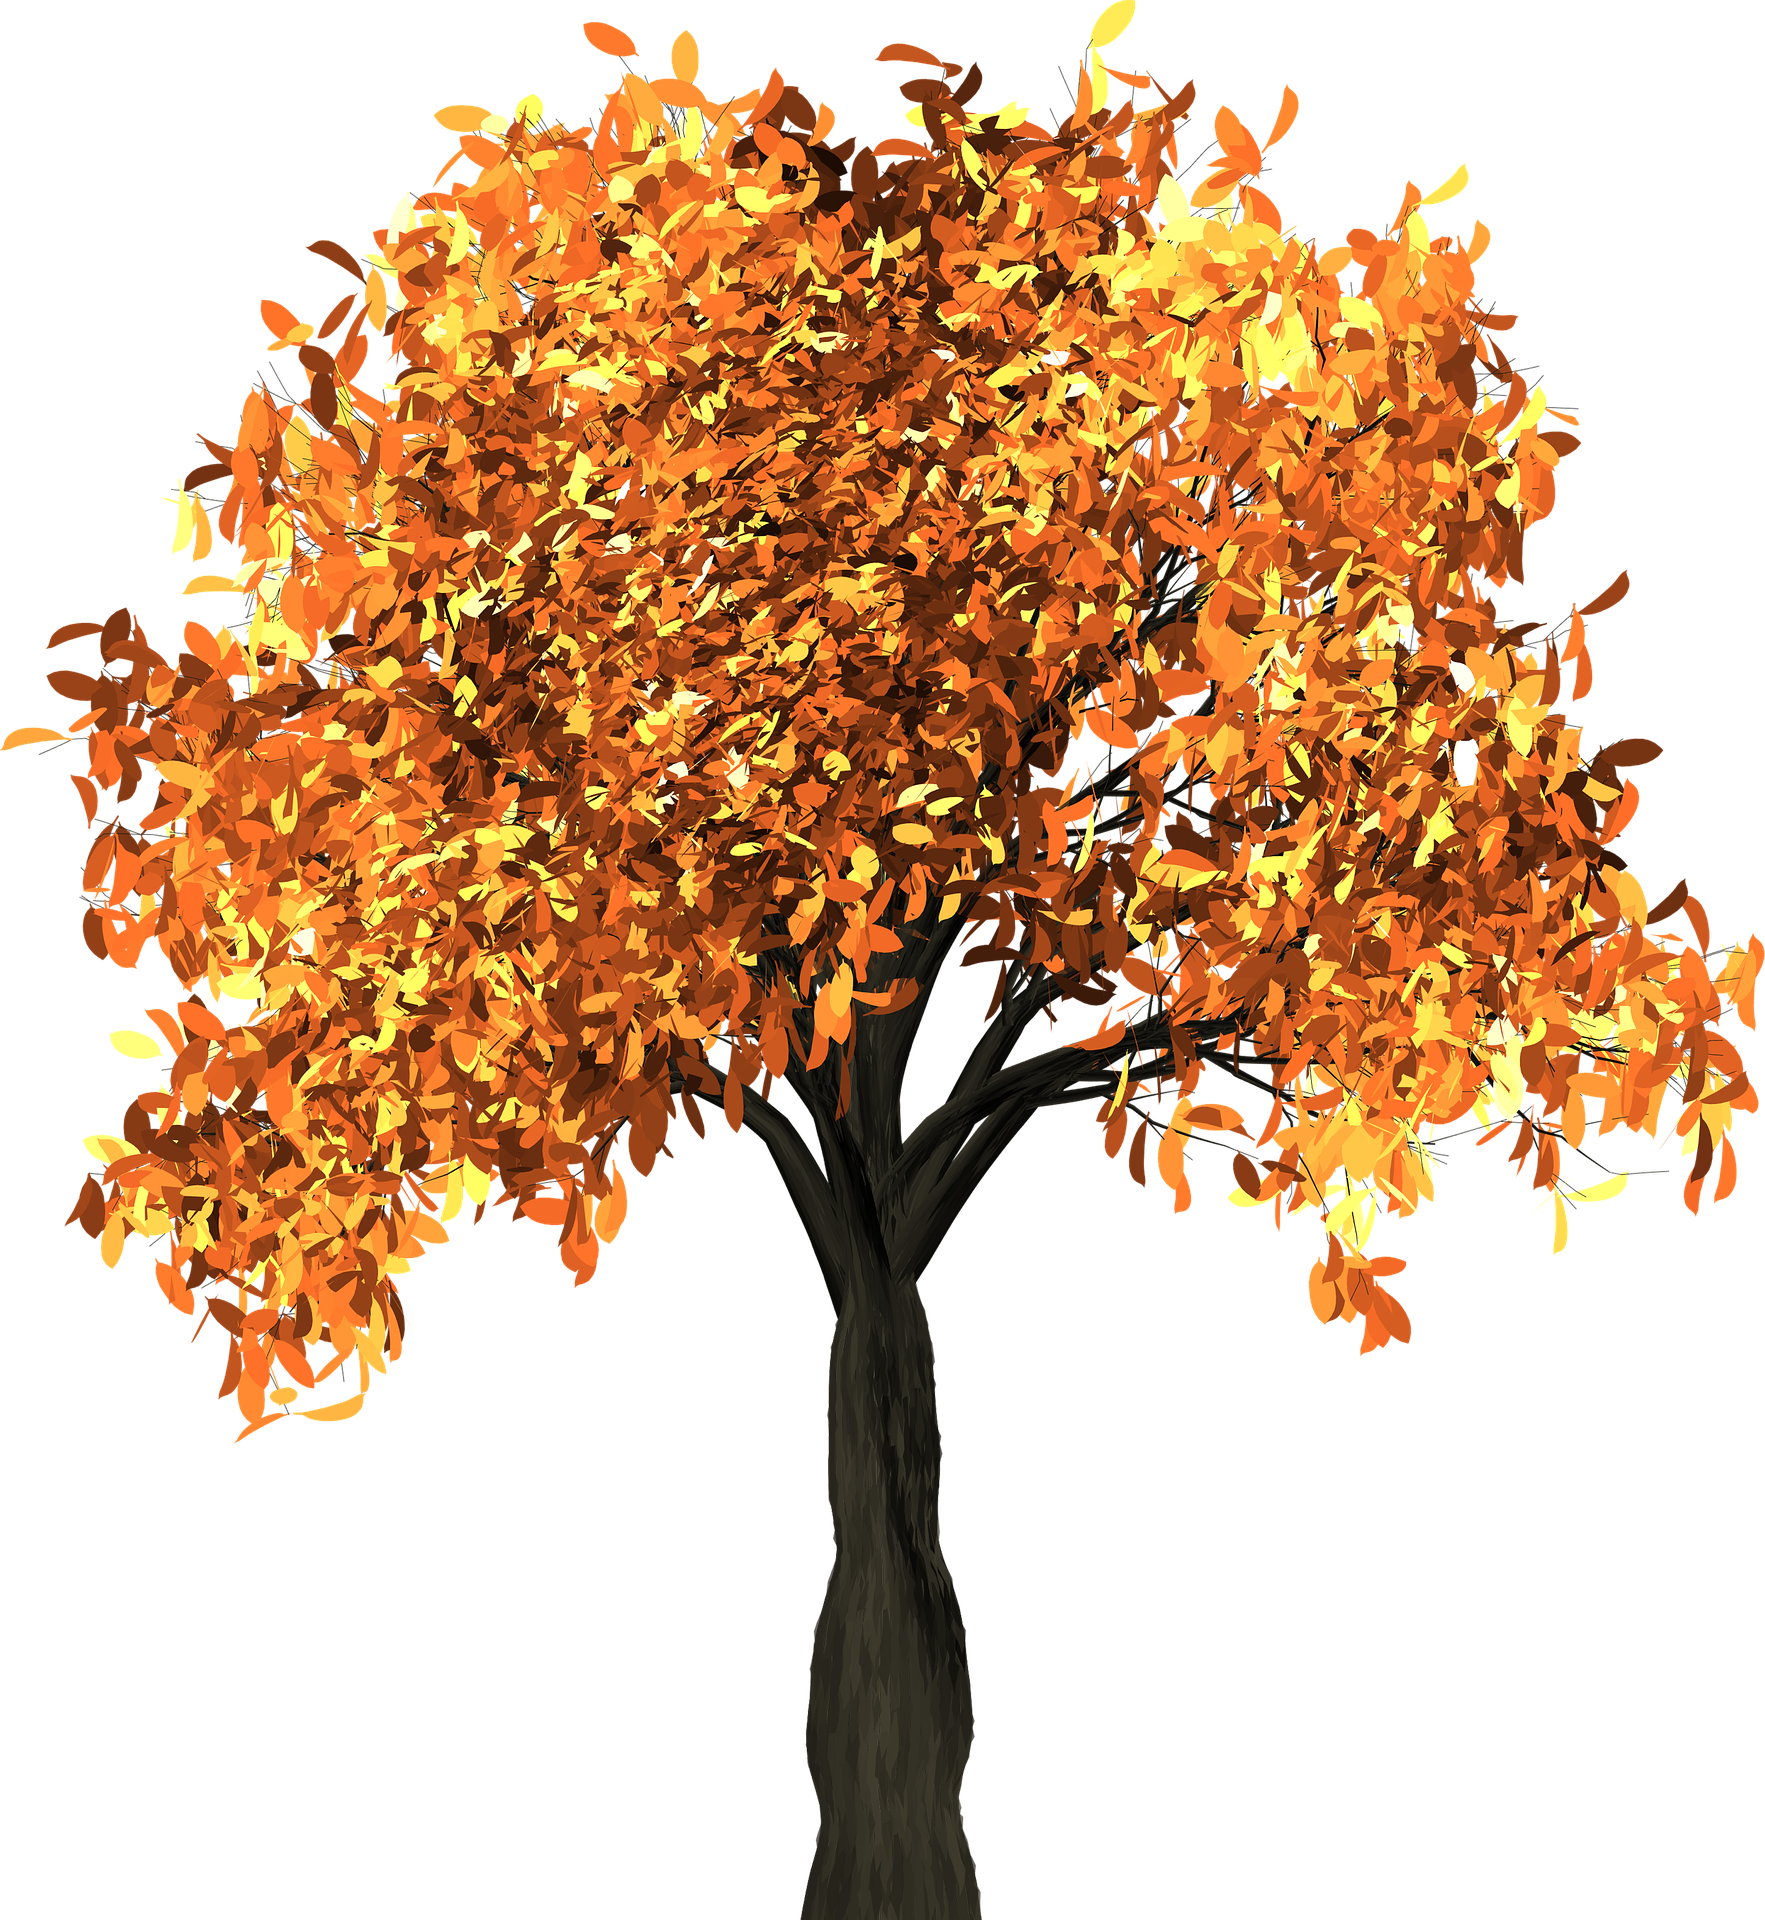 Tree with autumn leaves in orange and yellow